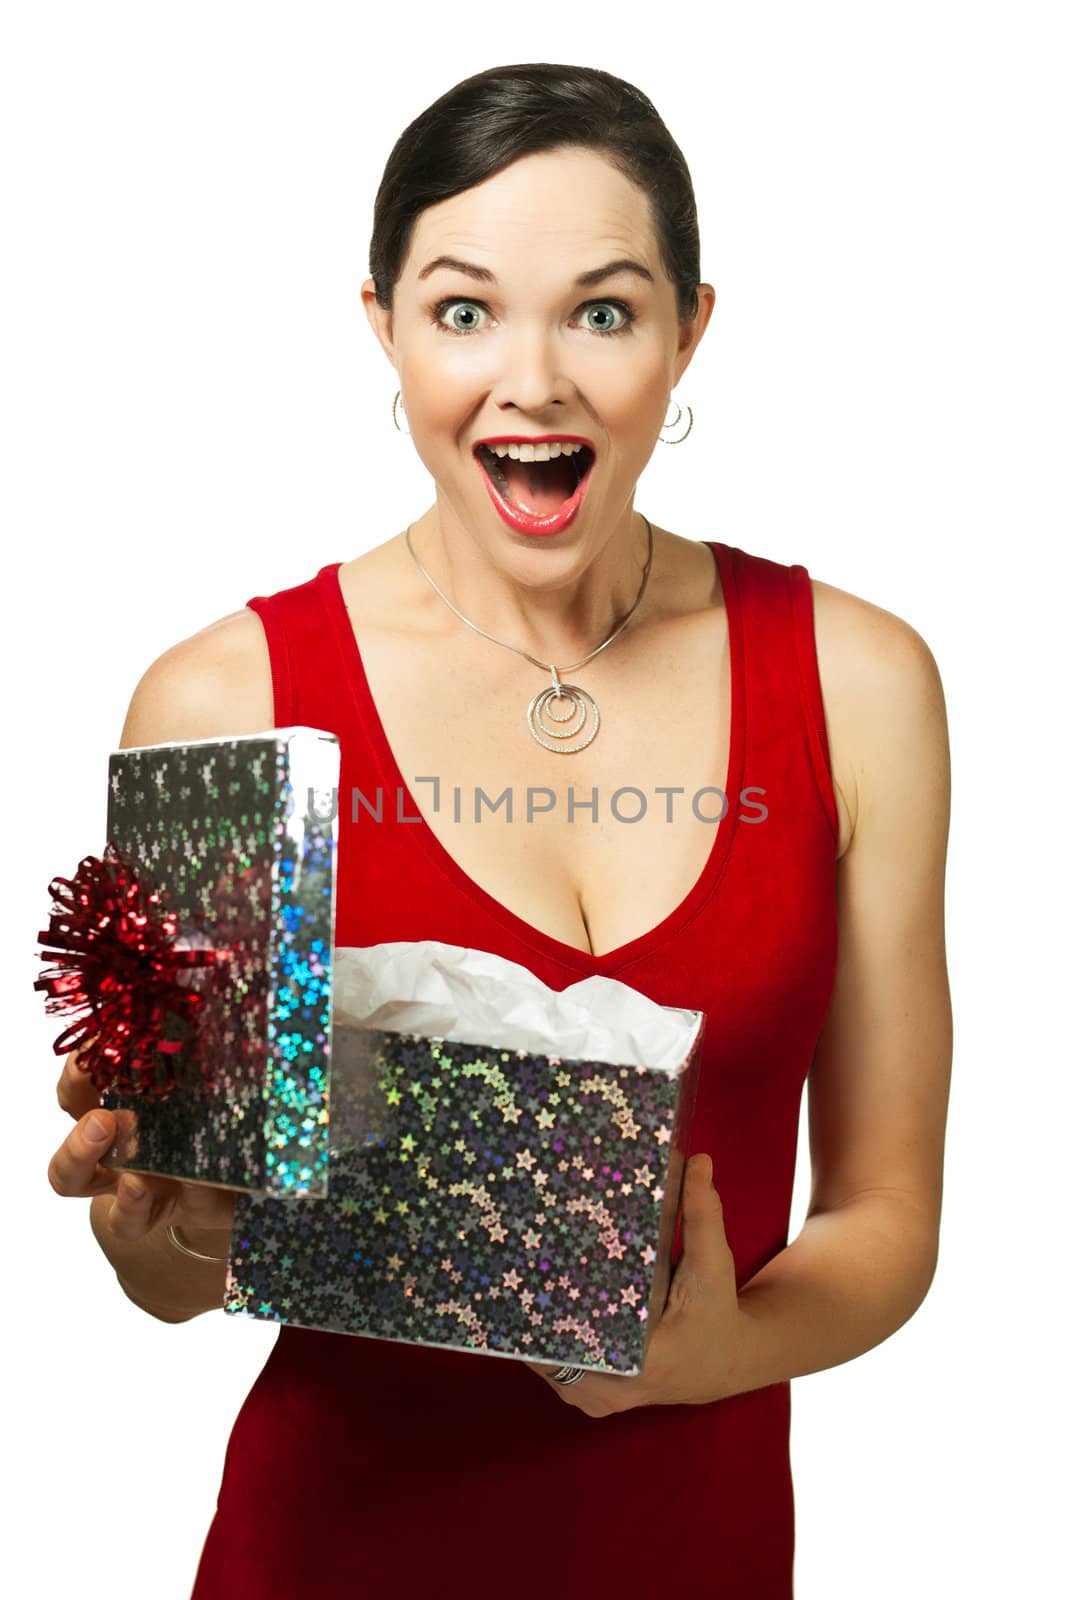 Beautiful young woman opening gift box looking very excited